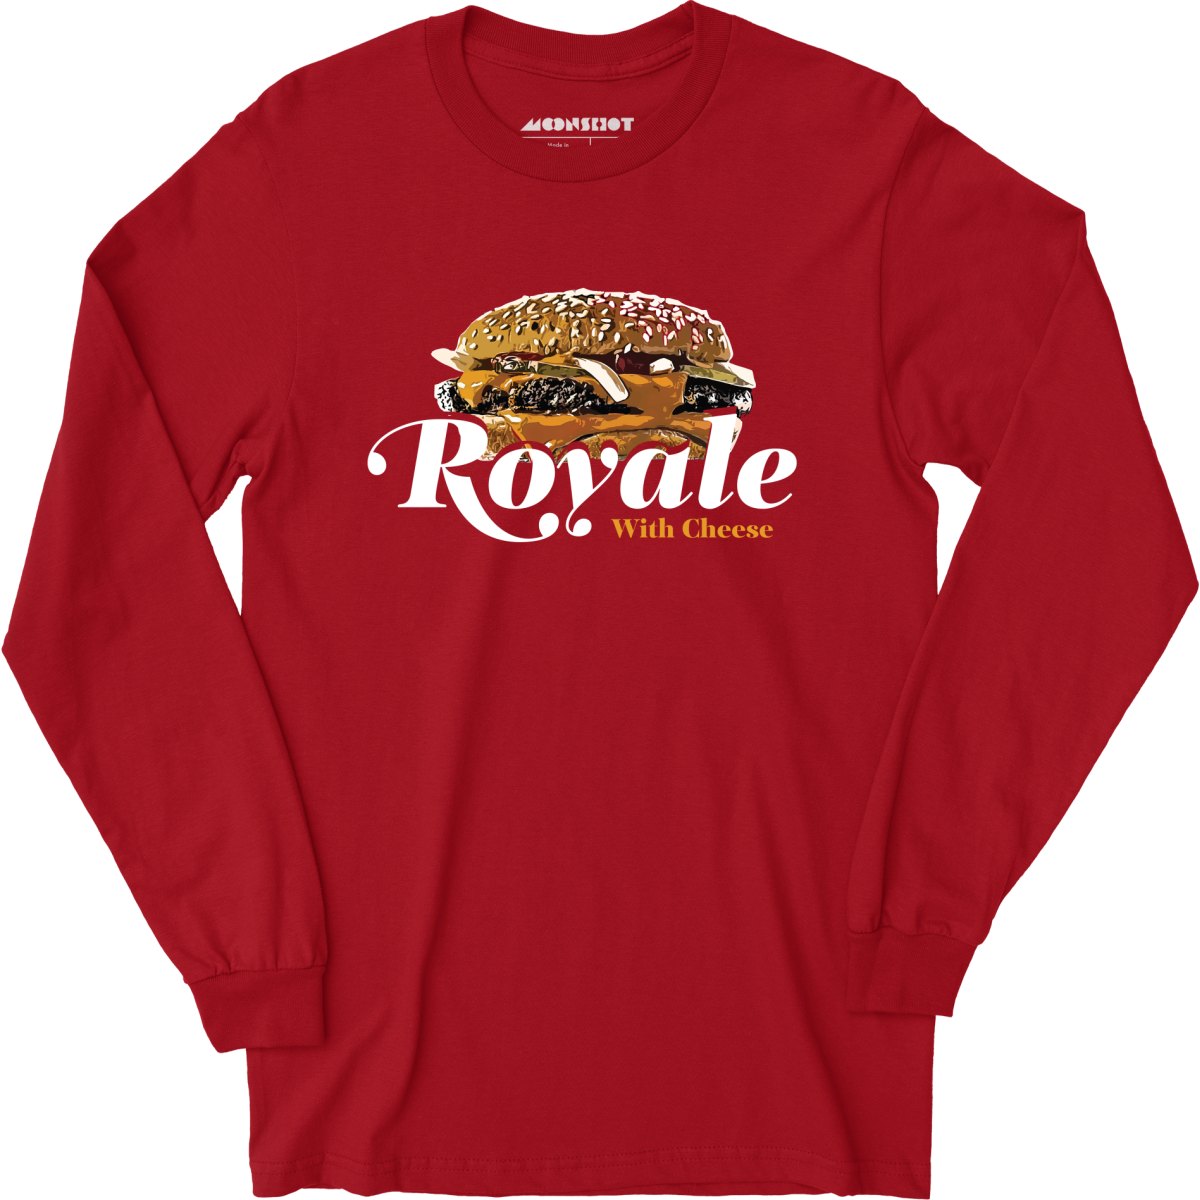 Royale With Cheese - Long Sleeve T-Shirt